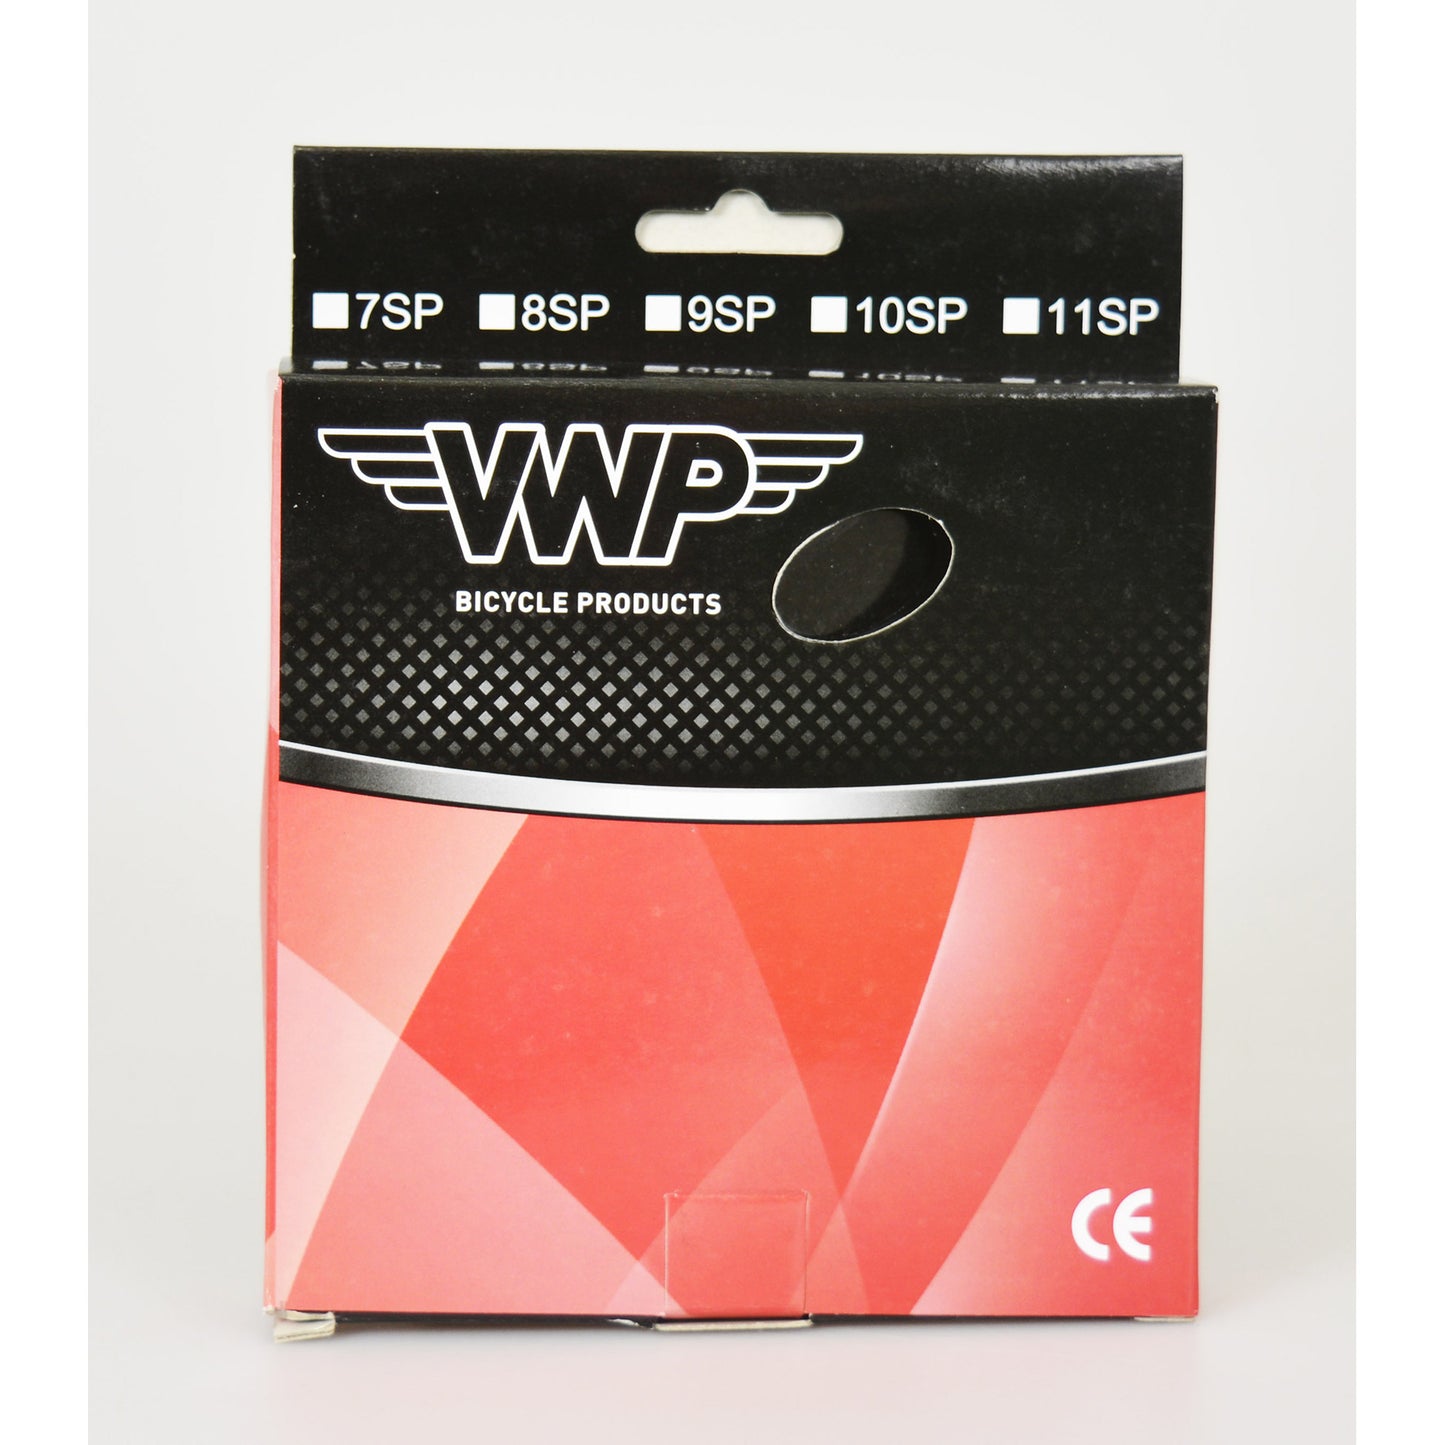 VWP Ketting 1 2-1 8 116 E-bike ExtraStrong anti roest MK410RB